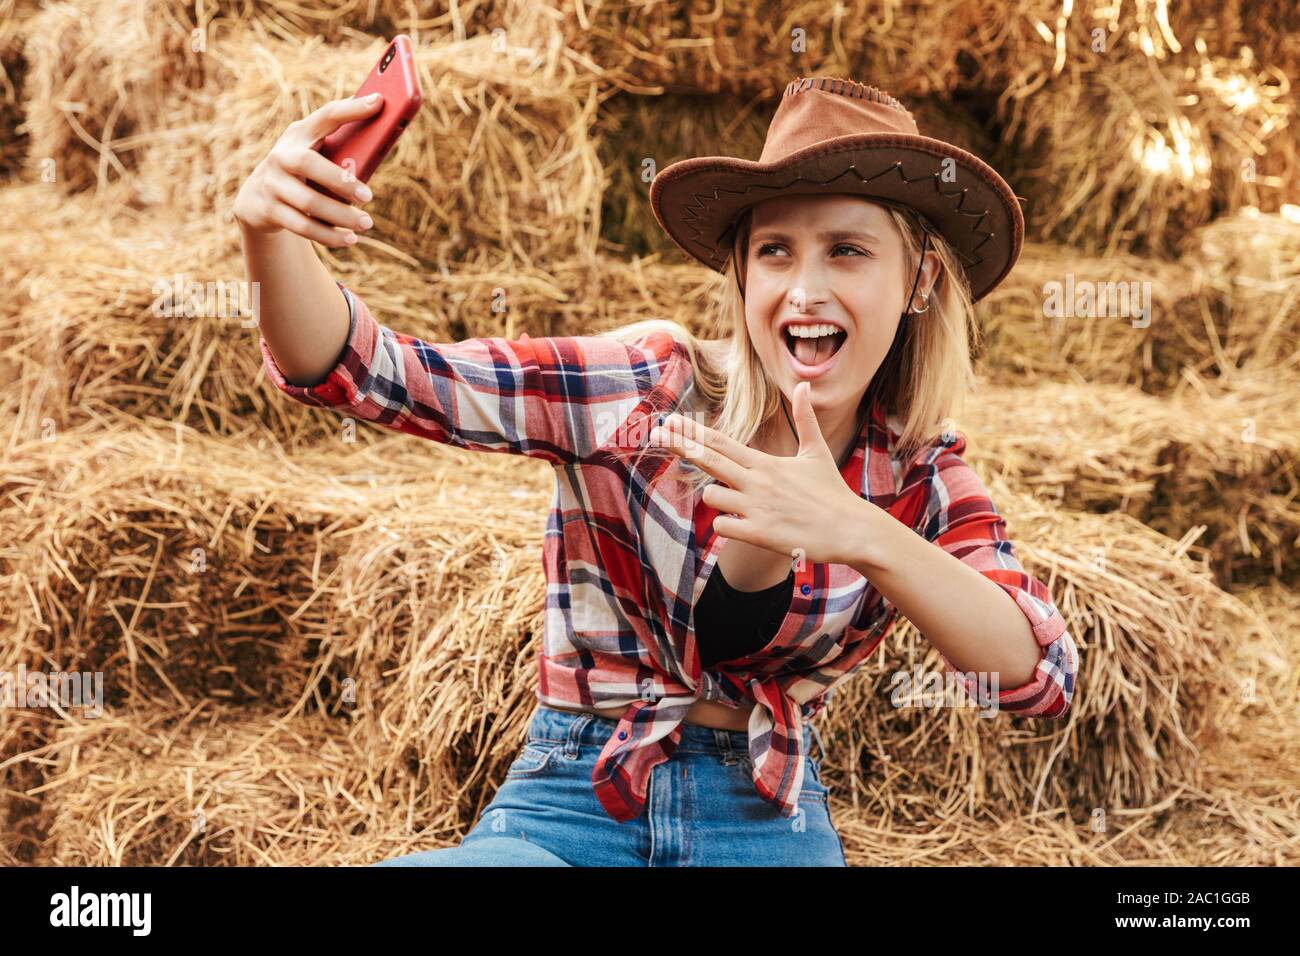 Smiling cheerful young blonde cowgirl sitting on a haystack at the barn, taking a selfie Stock Photo